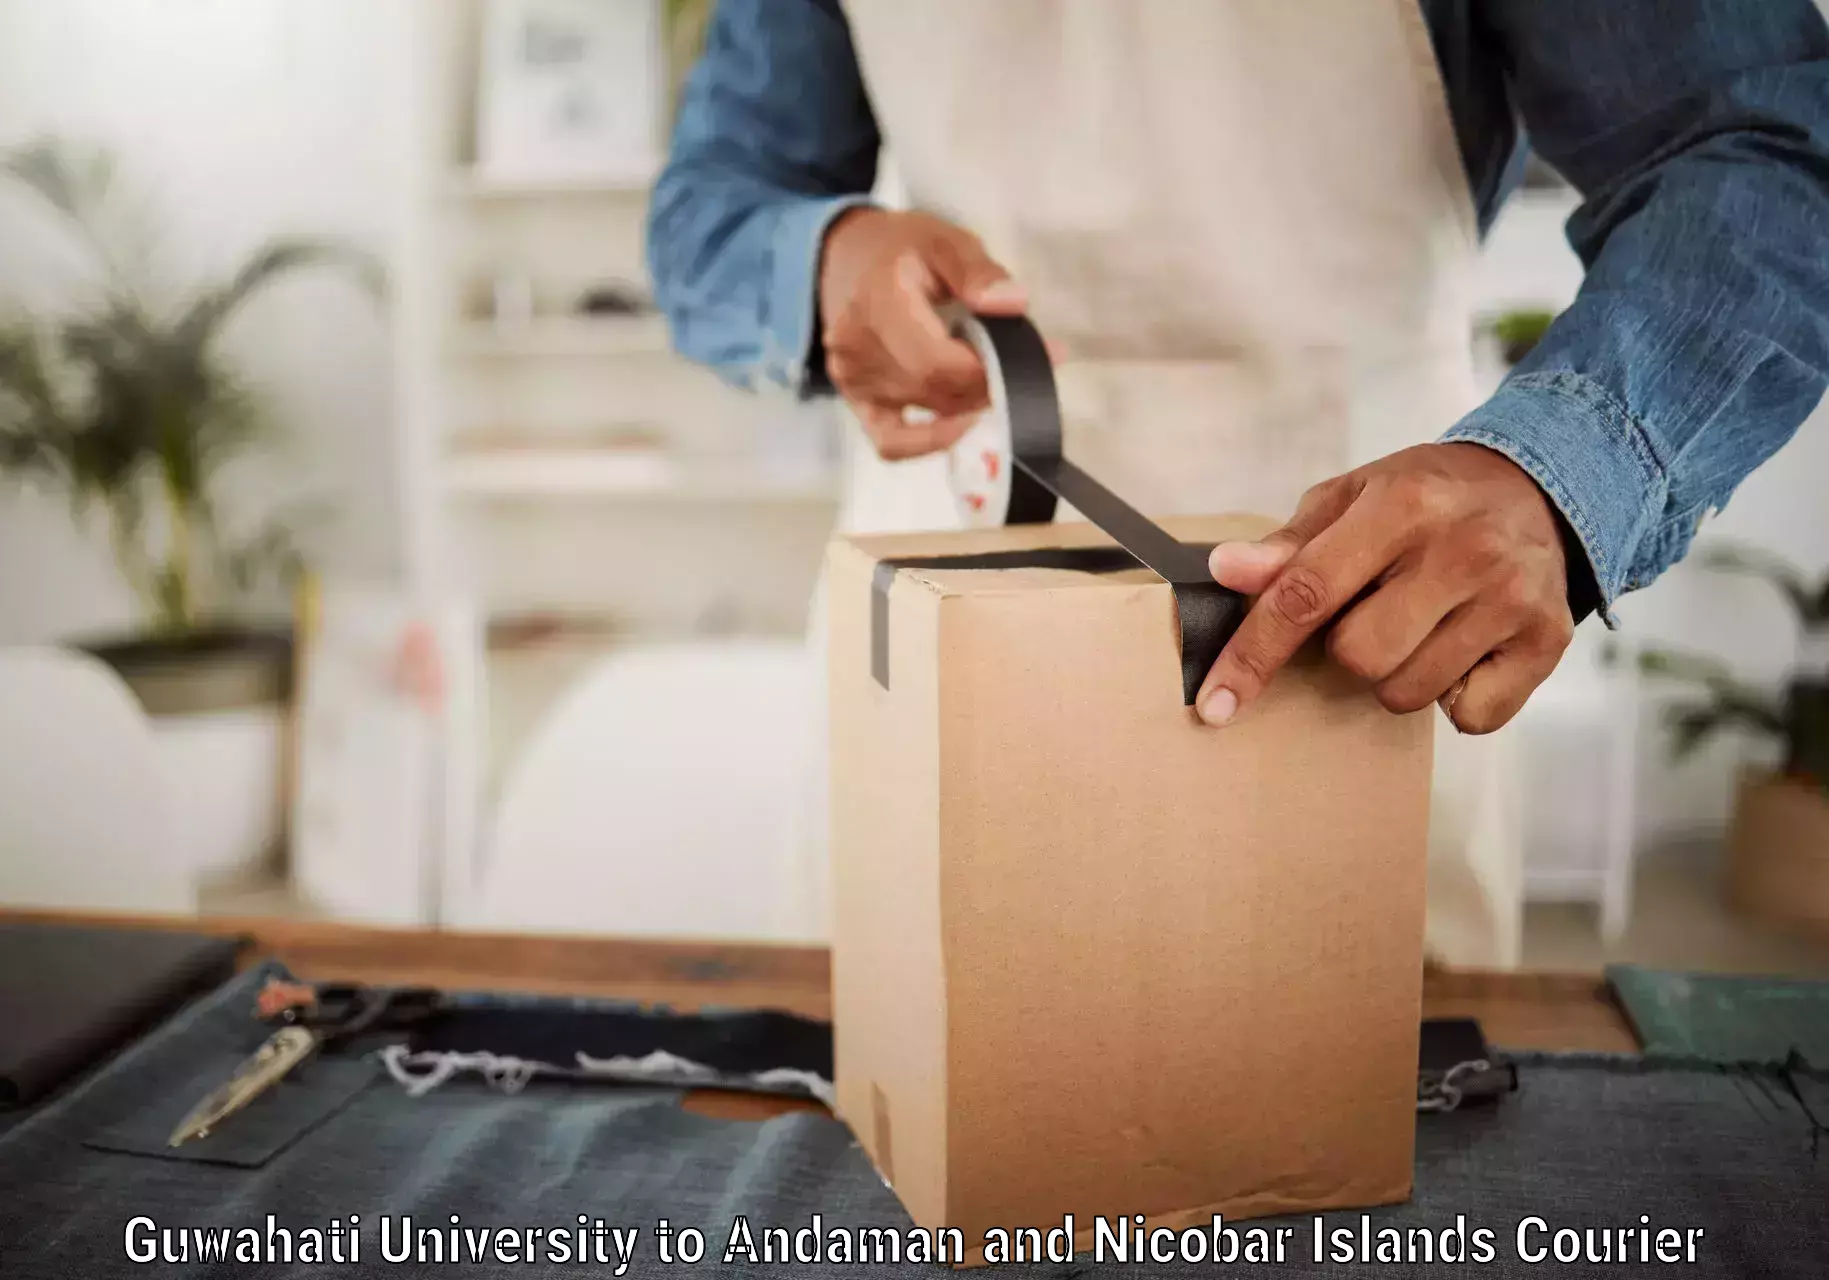 Professional courier services in Guwahati University to Andaman and Nicobar Islands